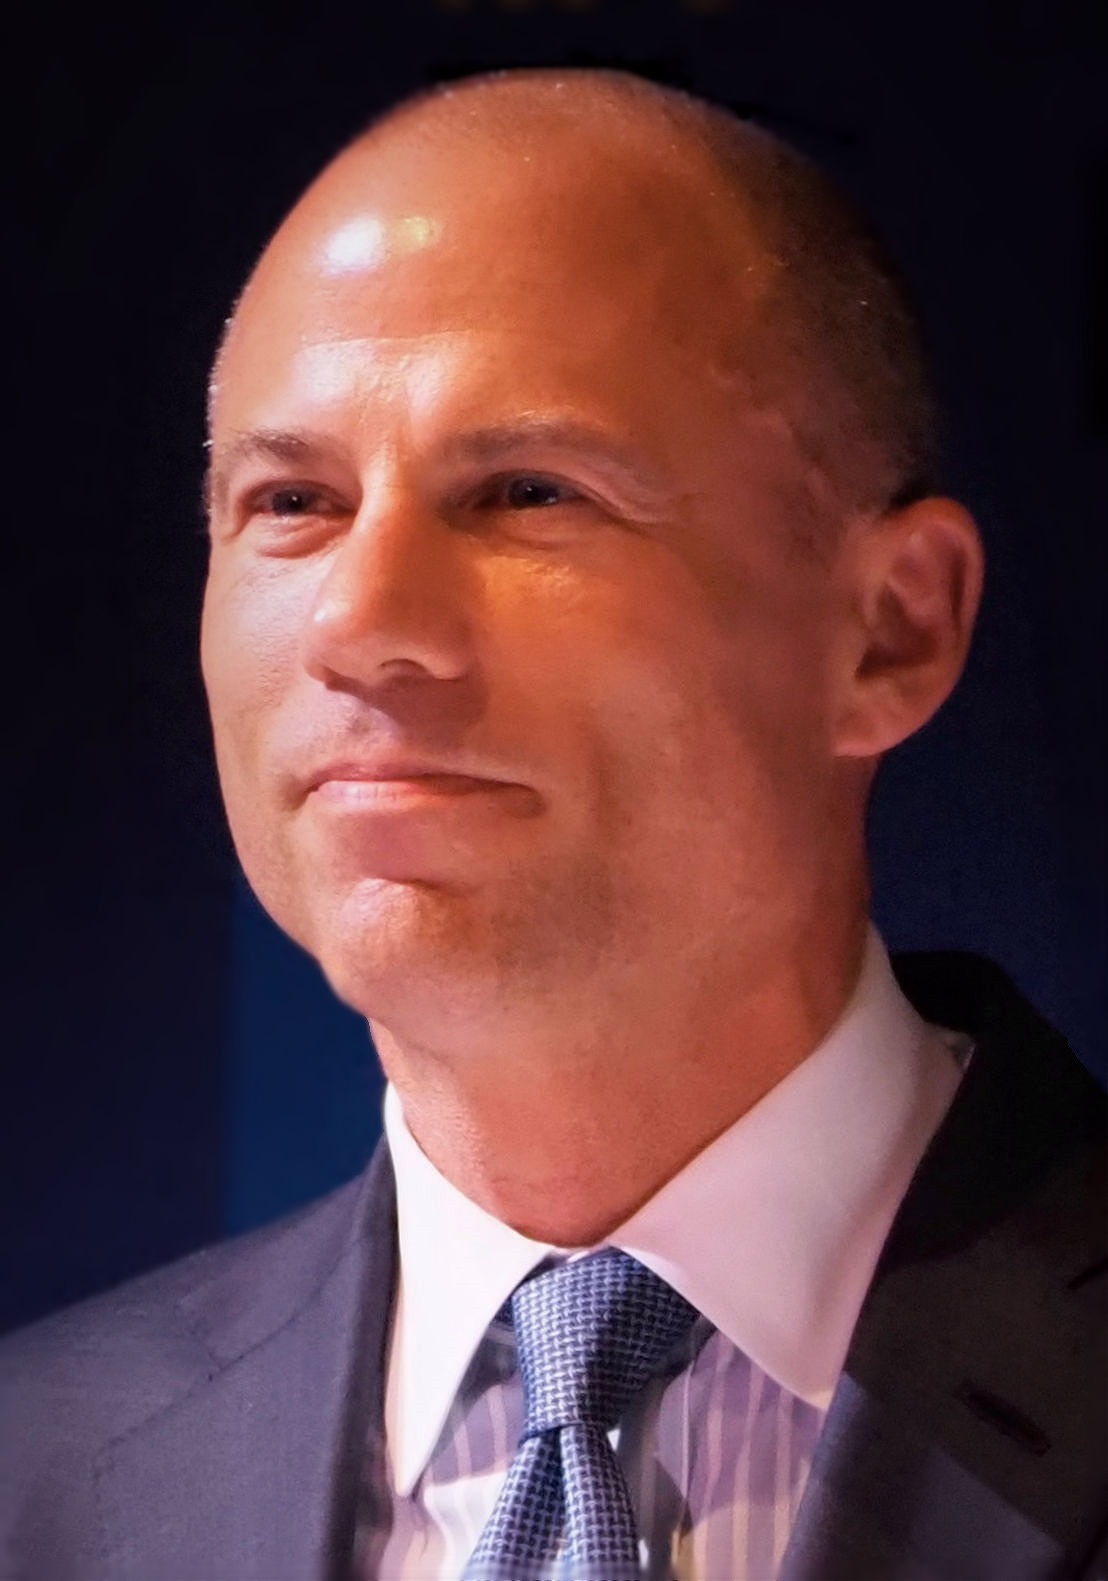 Lawyer Avenatti convicted for trying to extort Nike